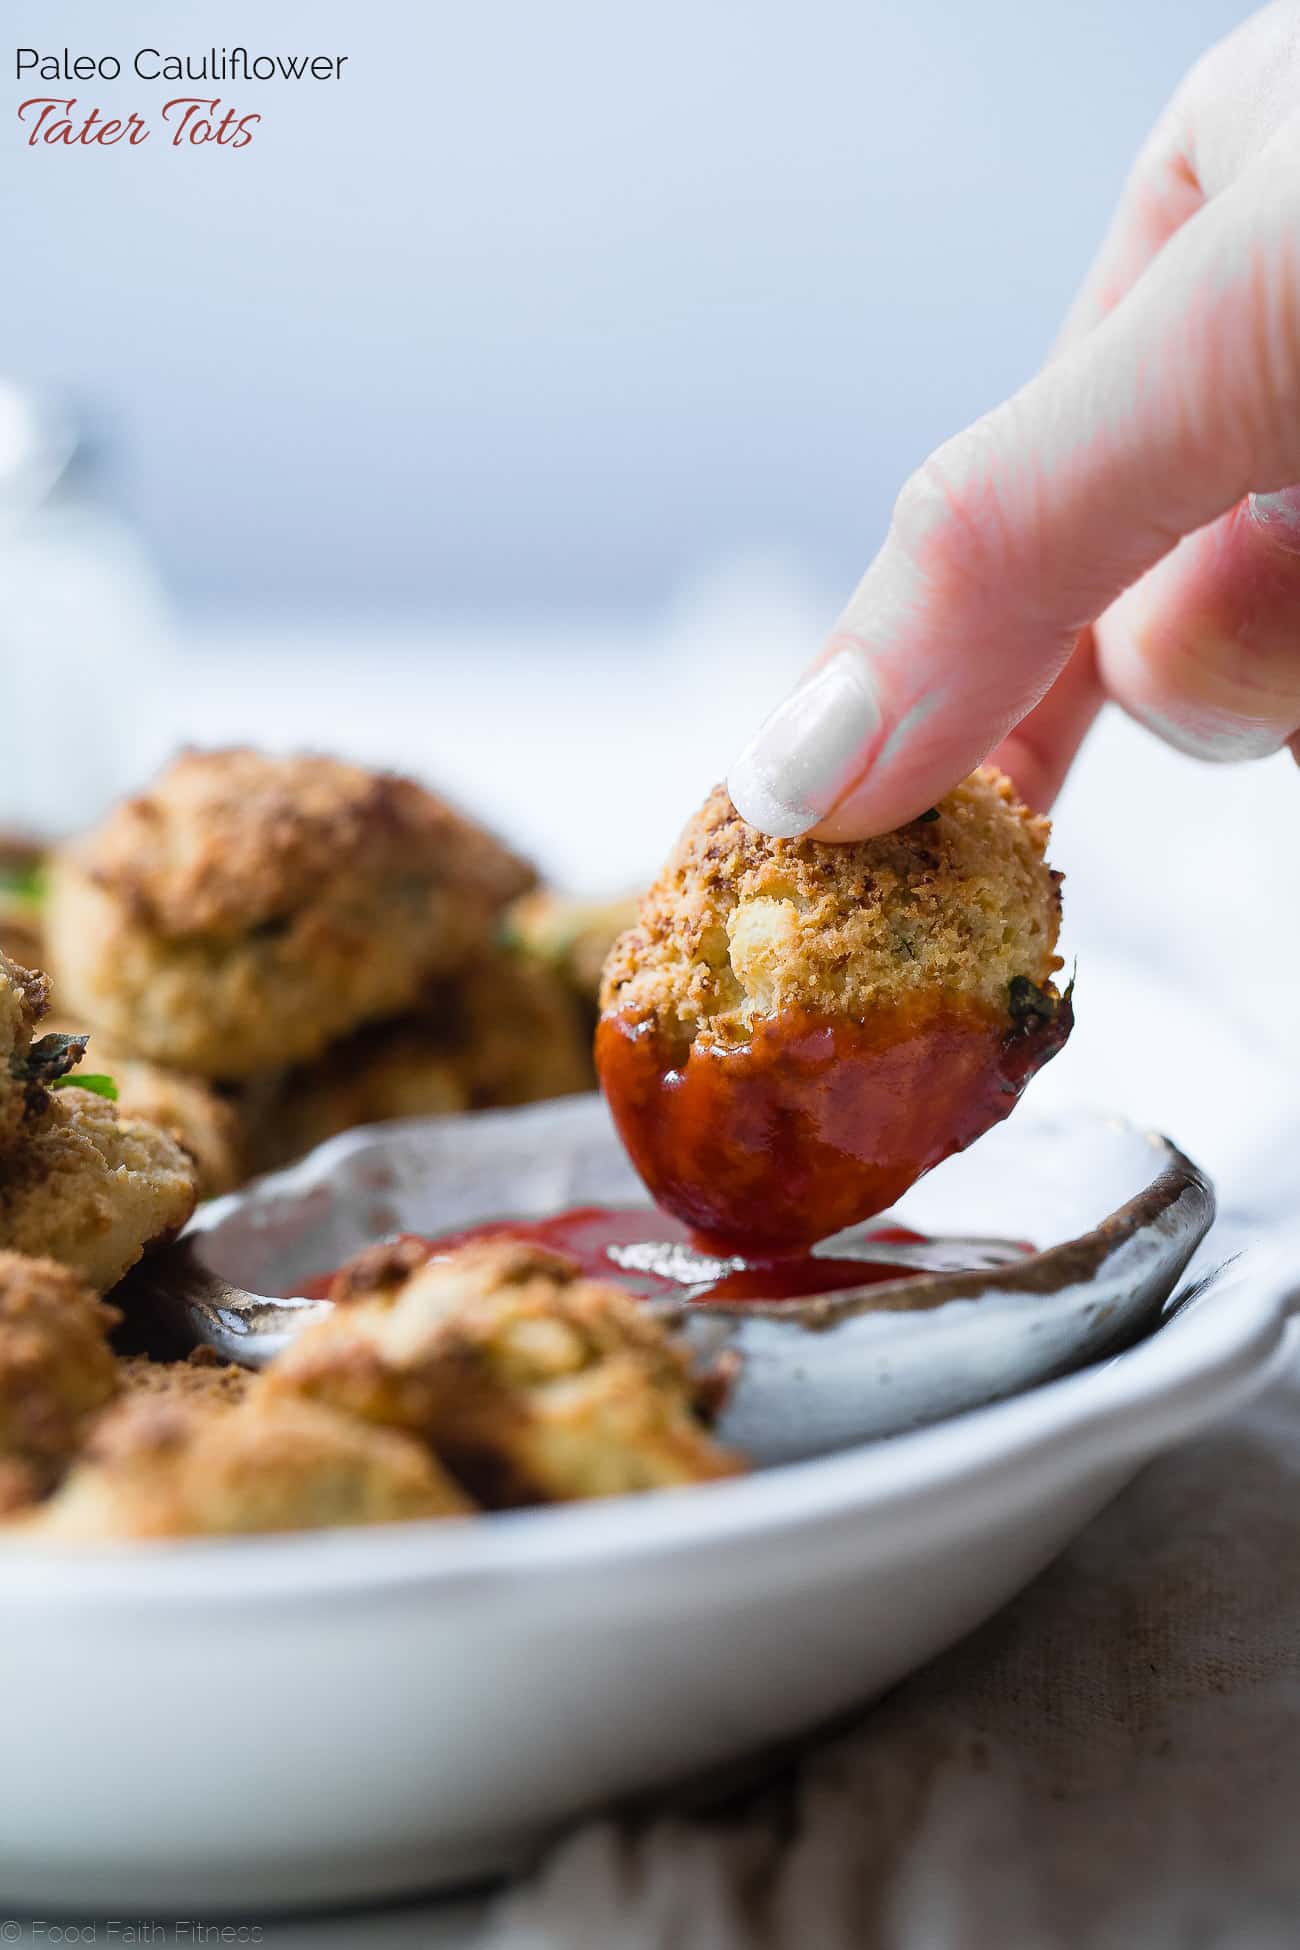 How to Make Cauliflower Tater Tots - Ever wondered how to make low carb cauliflower tater tots? Learn two easy ways – a paleo and cheesy version – to make your favorite treat healthy, gluten free and grain free!  | Foodfaithfitness.com | @FoodFaithFit